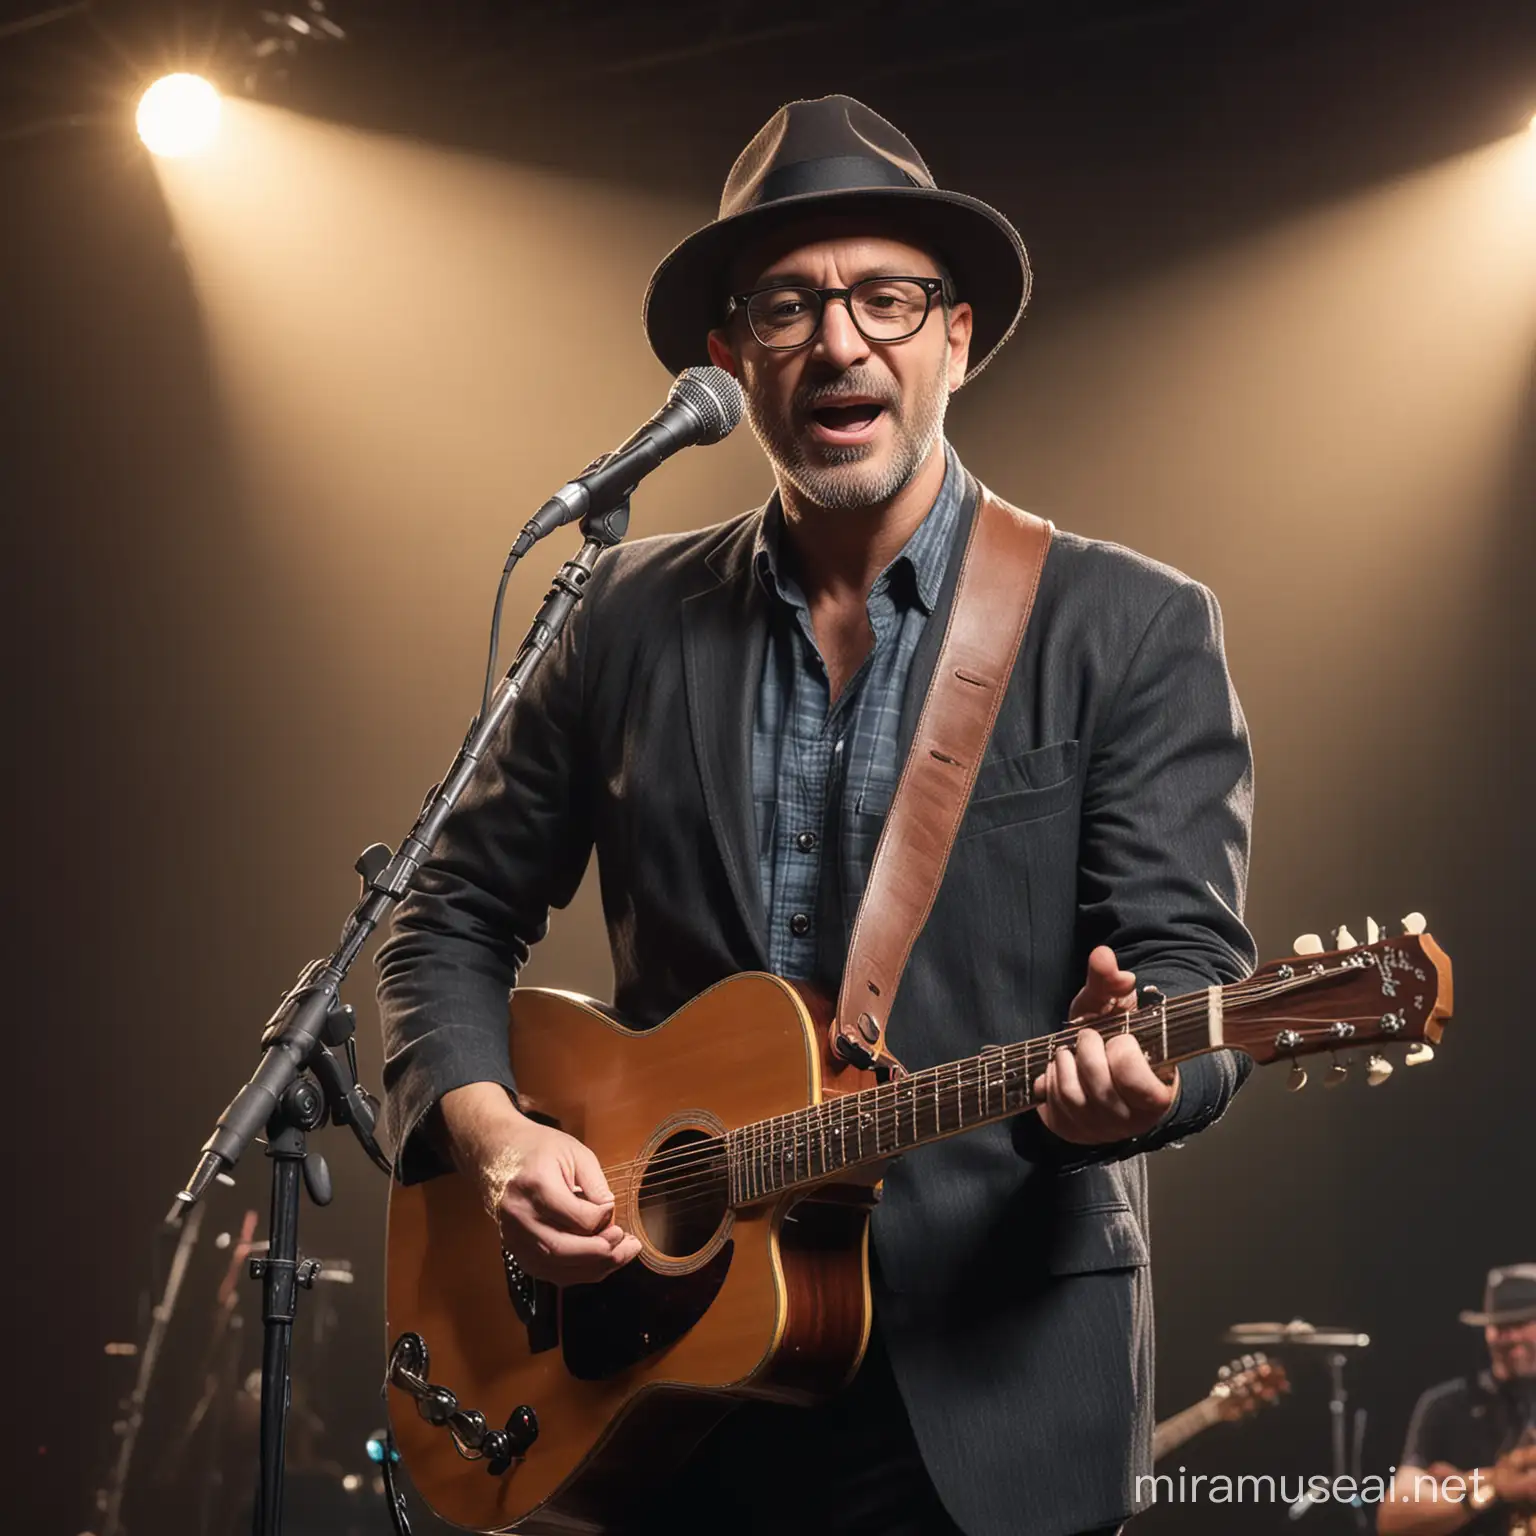 Men 46 years old, glasses, wearing fedora hat, playing guitar and singing with old microphone stand on stage.